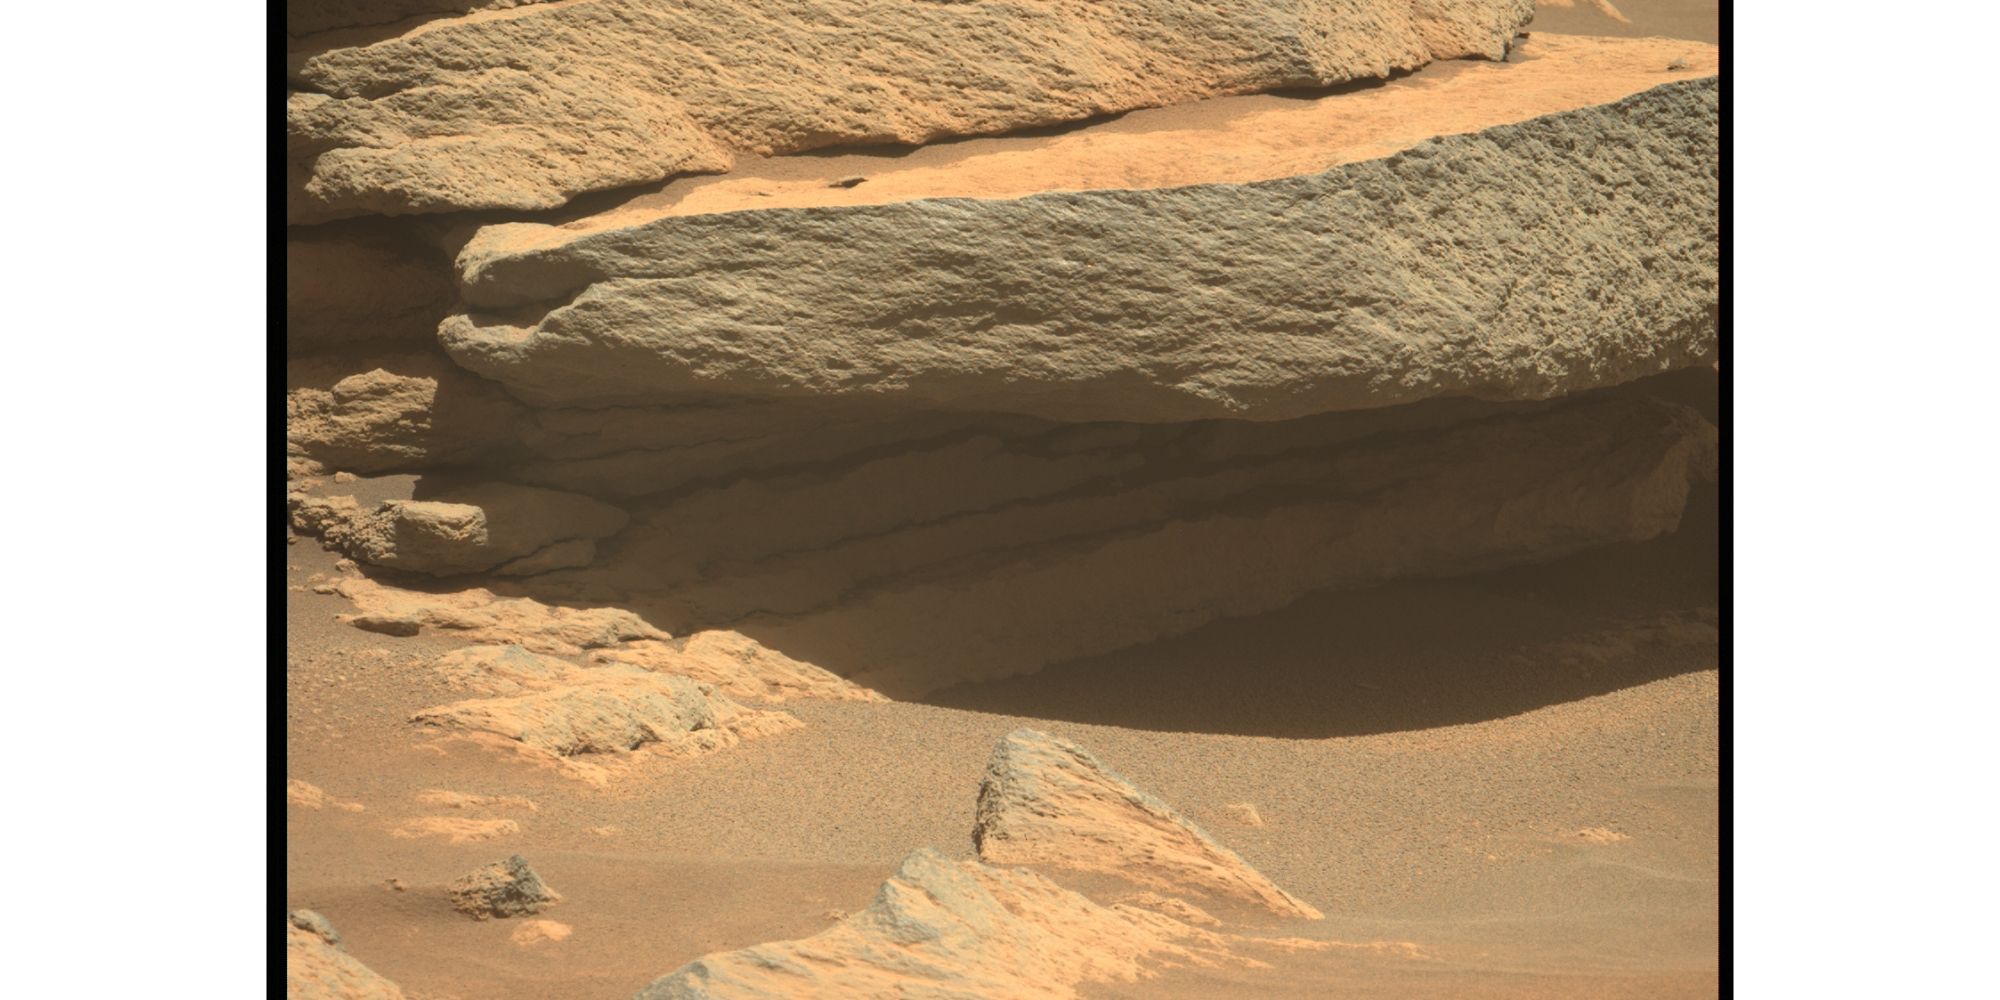 Large Martian Rock Creates A Welcoming Shadow In Latest Perseverance Photo